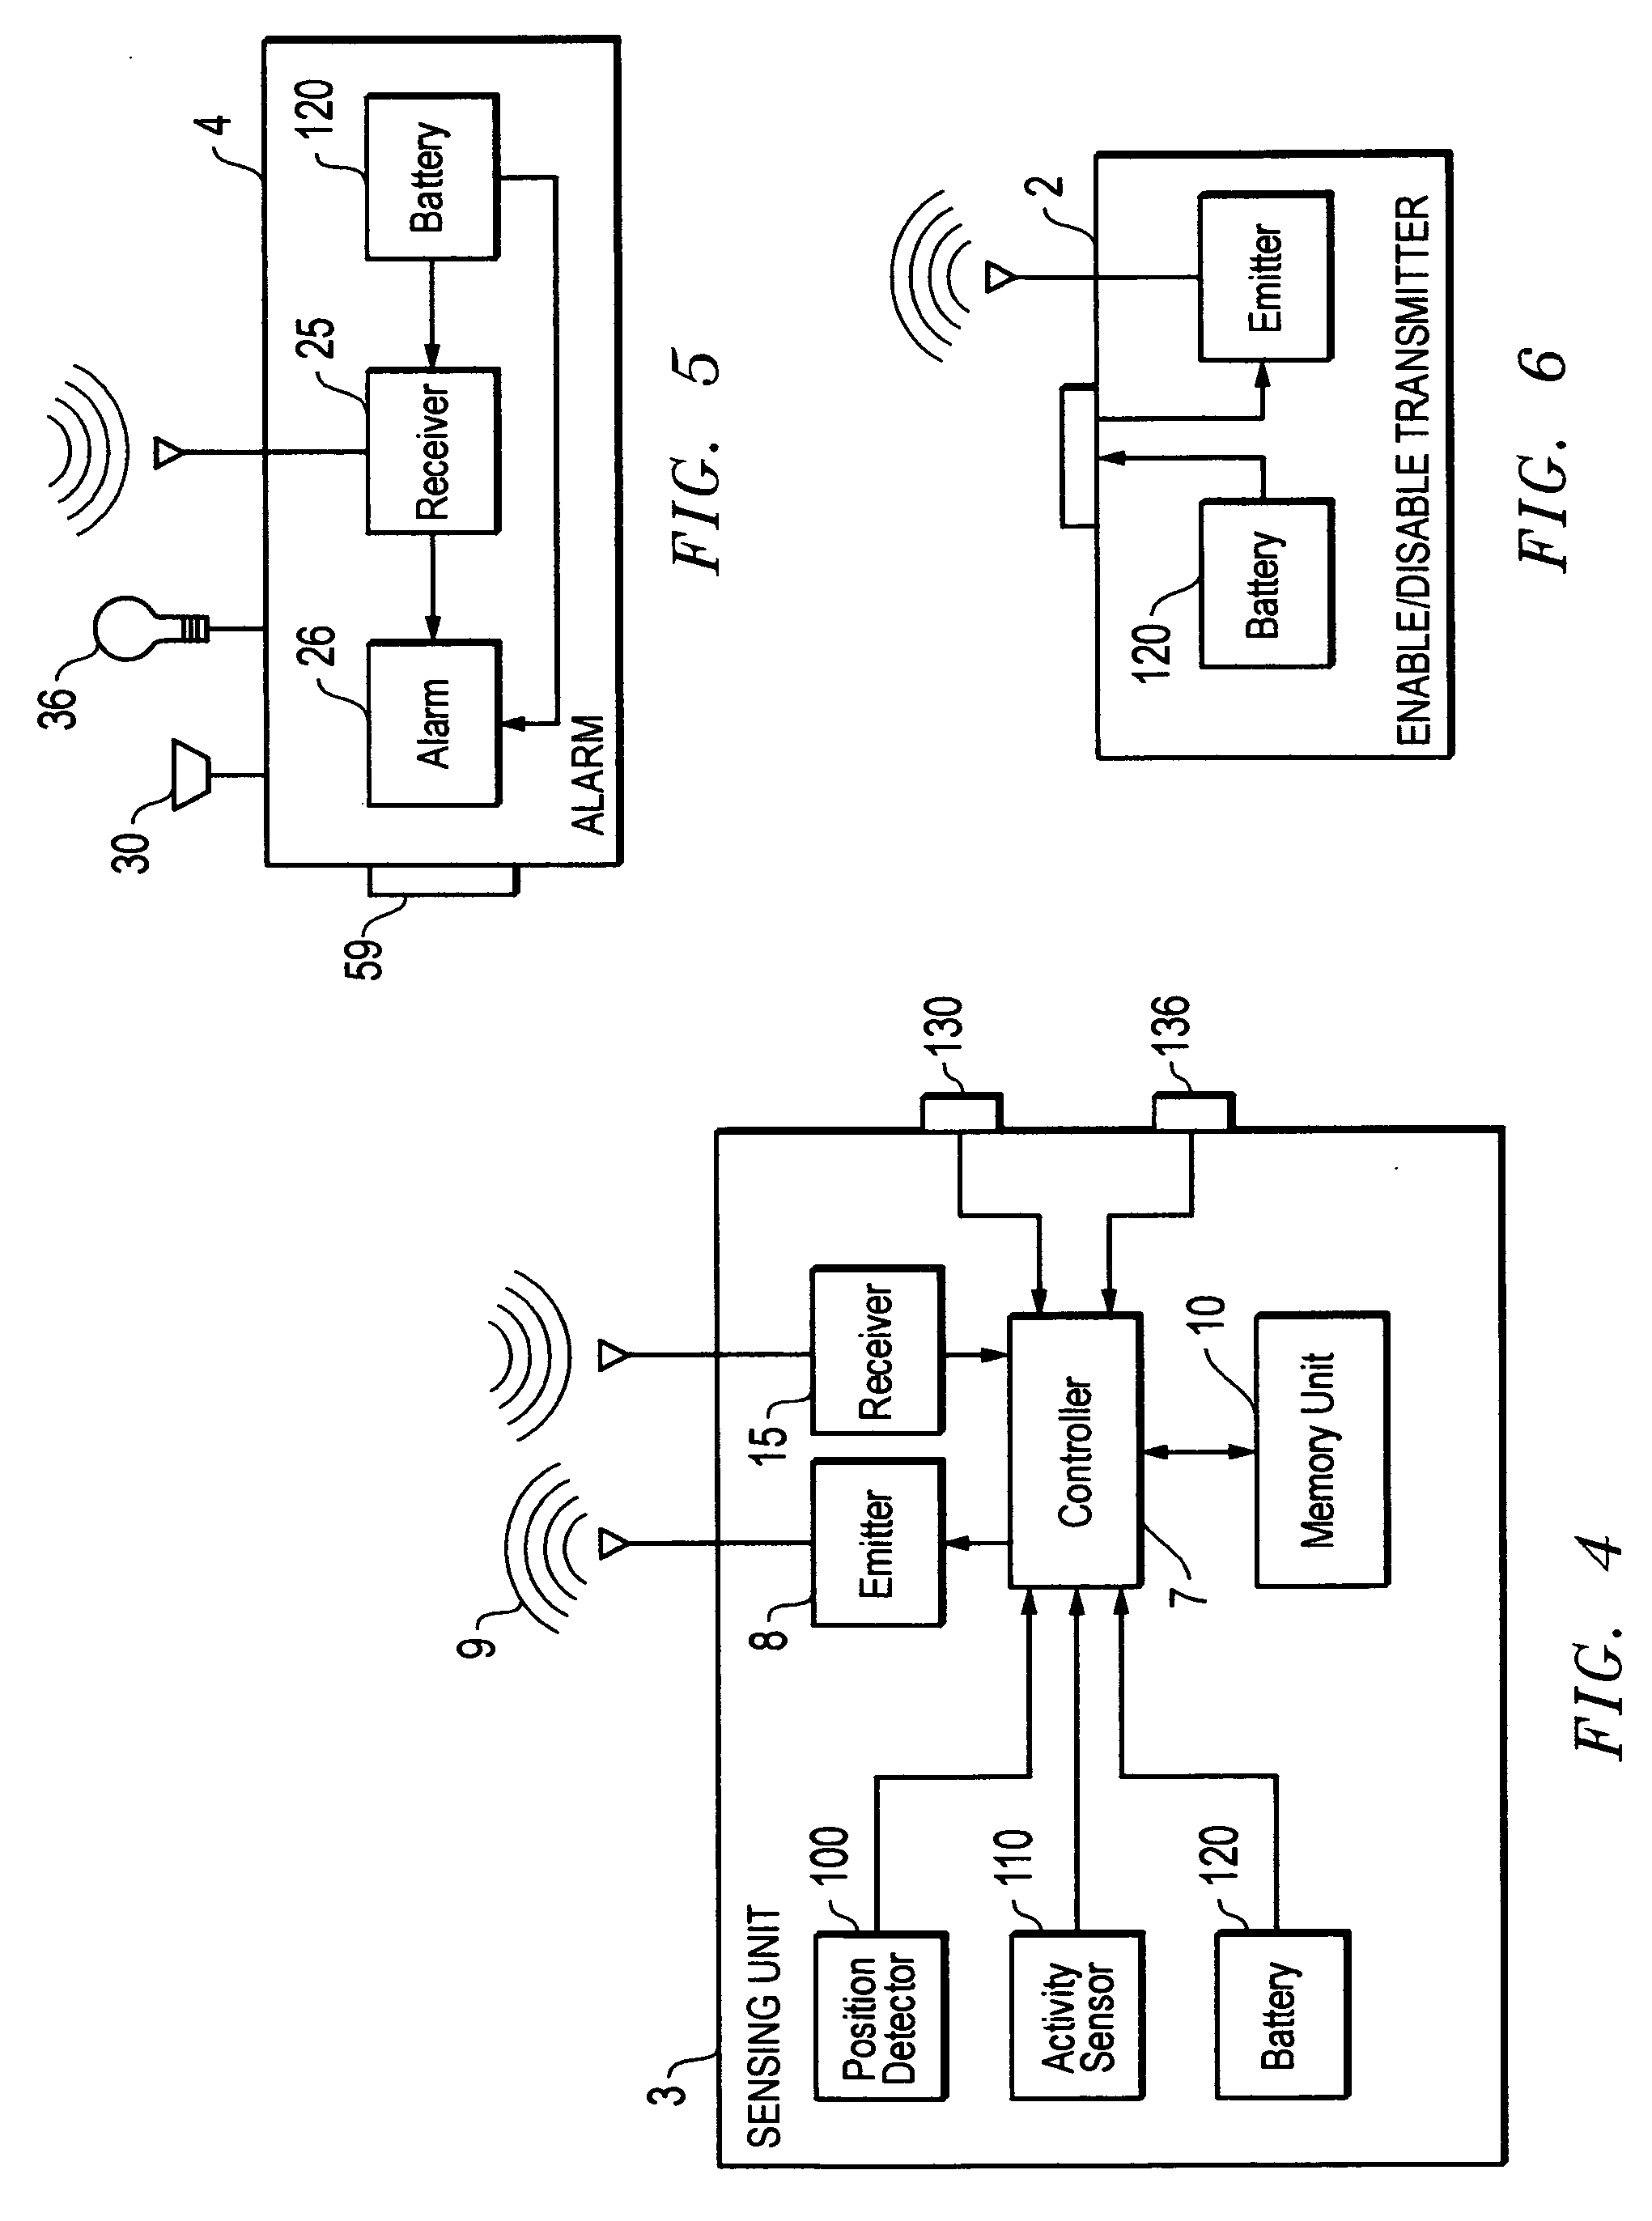 Portable security system and method